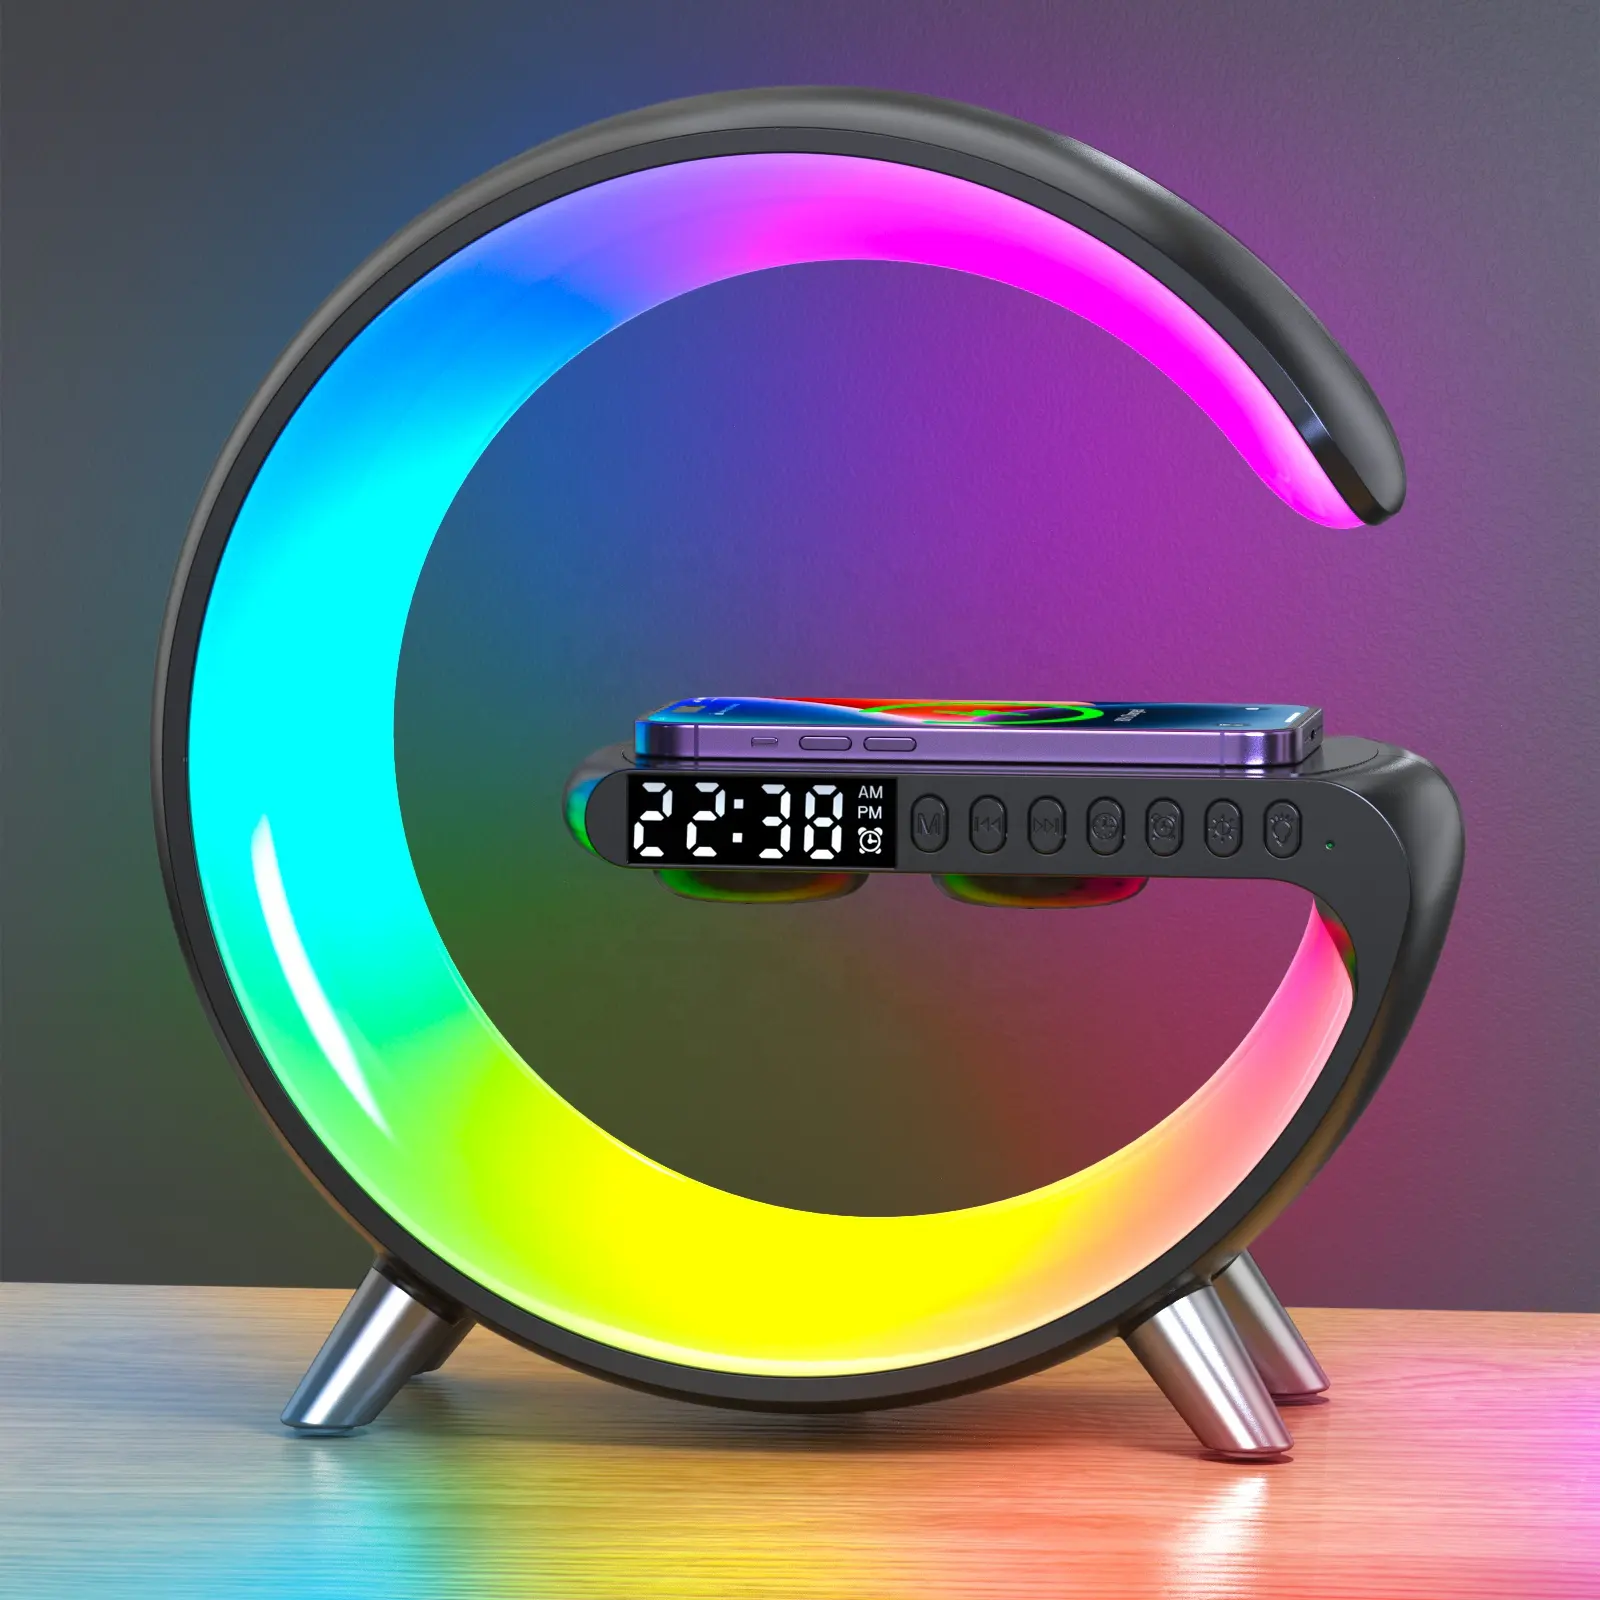 New Product Explosion N69 Wake up Light RGB Colorful Ambient night light bluetooth speaker Wireless Charging Alarm Clock